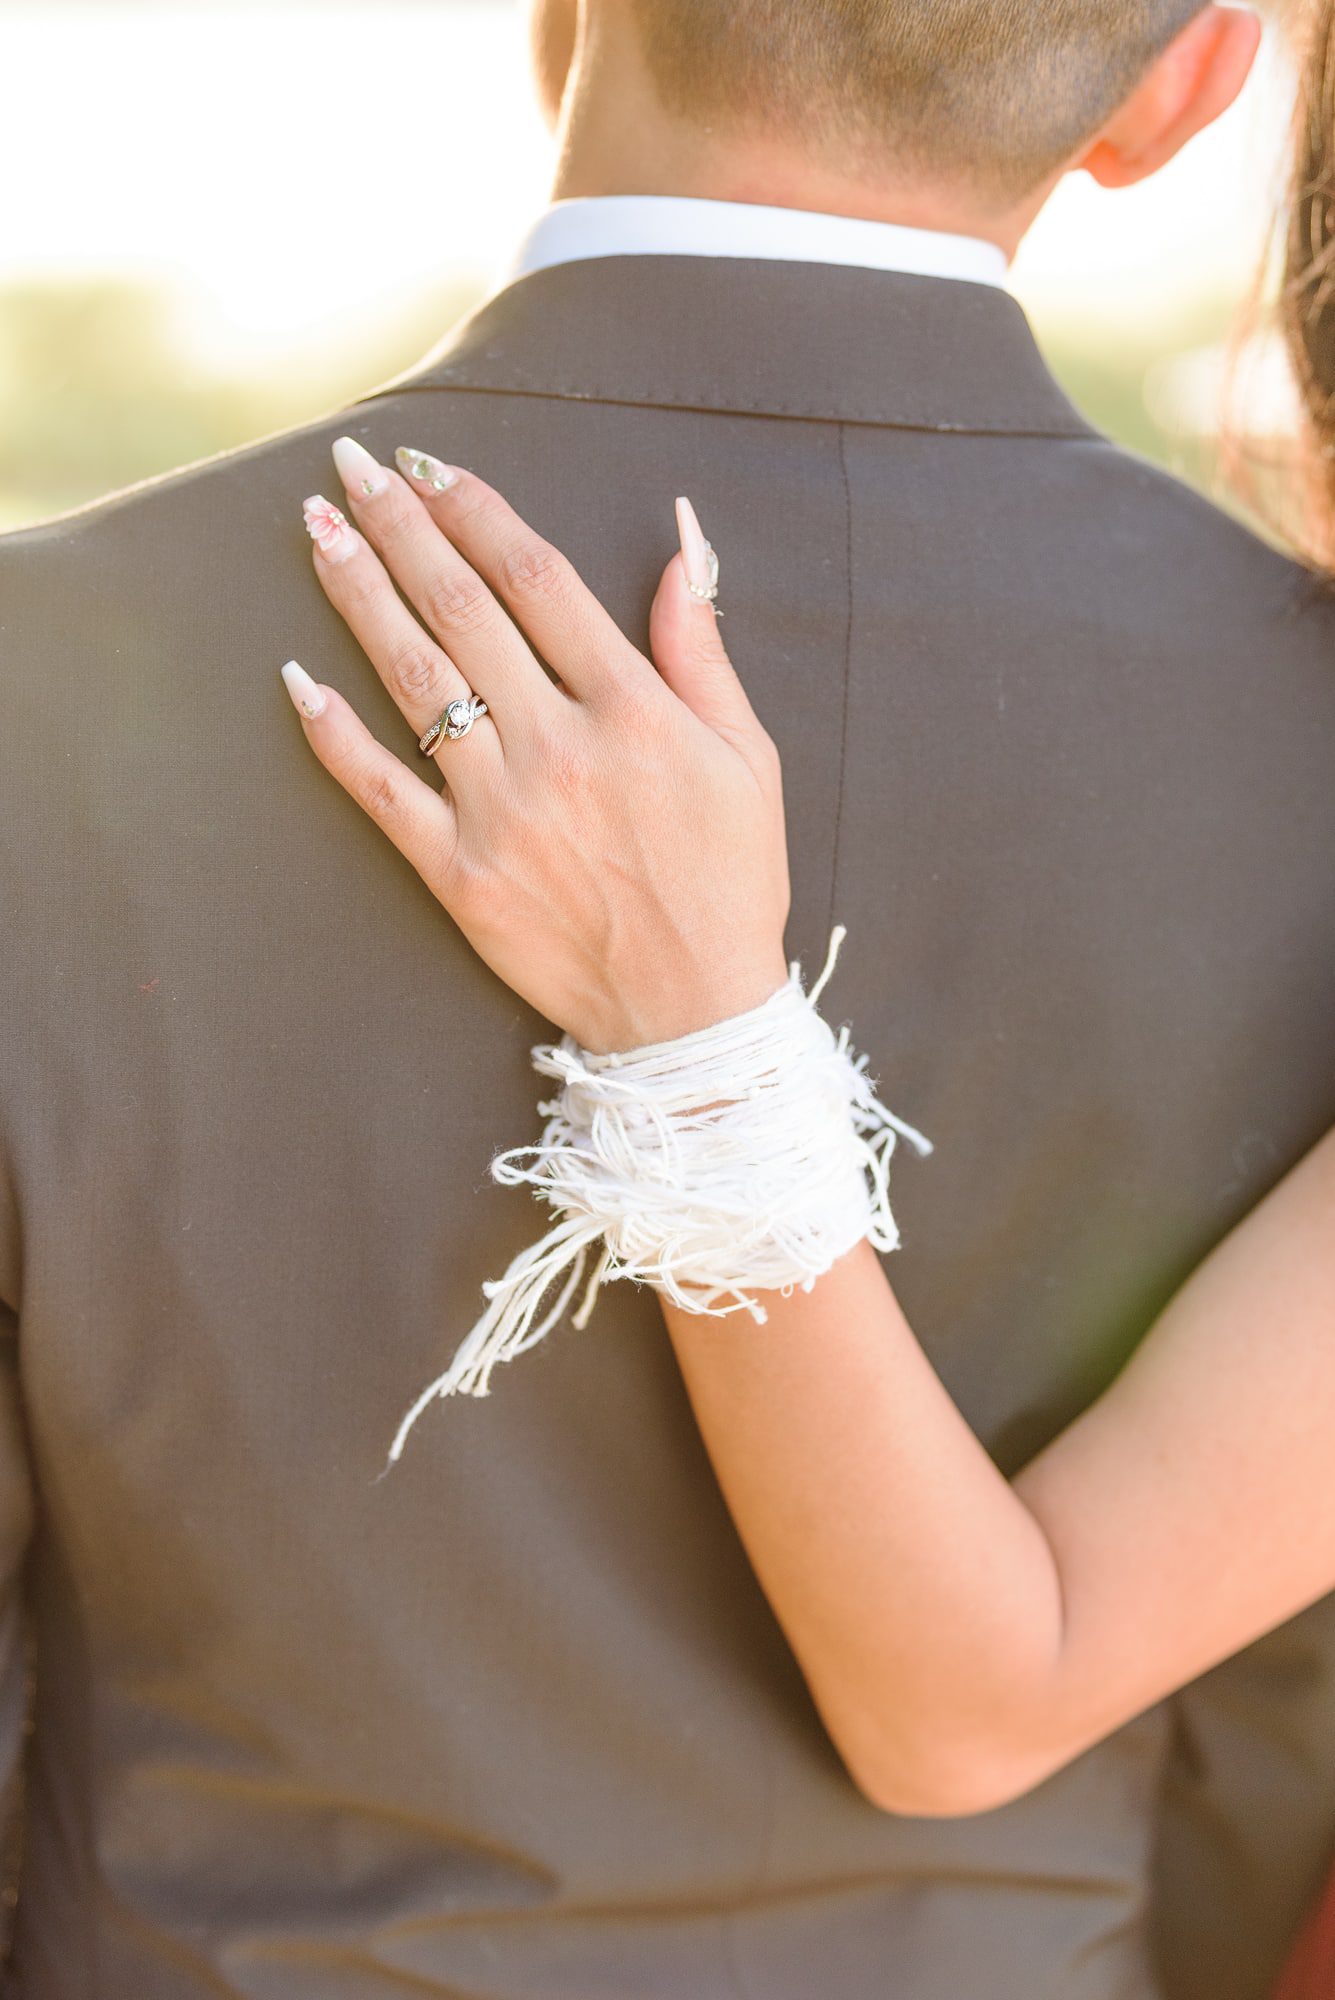 The bride's wrist has hundreds of white strings tied around it during their Hmong ceremony.